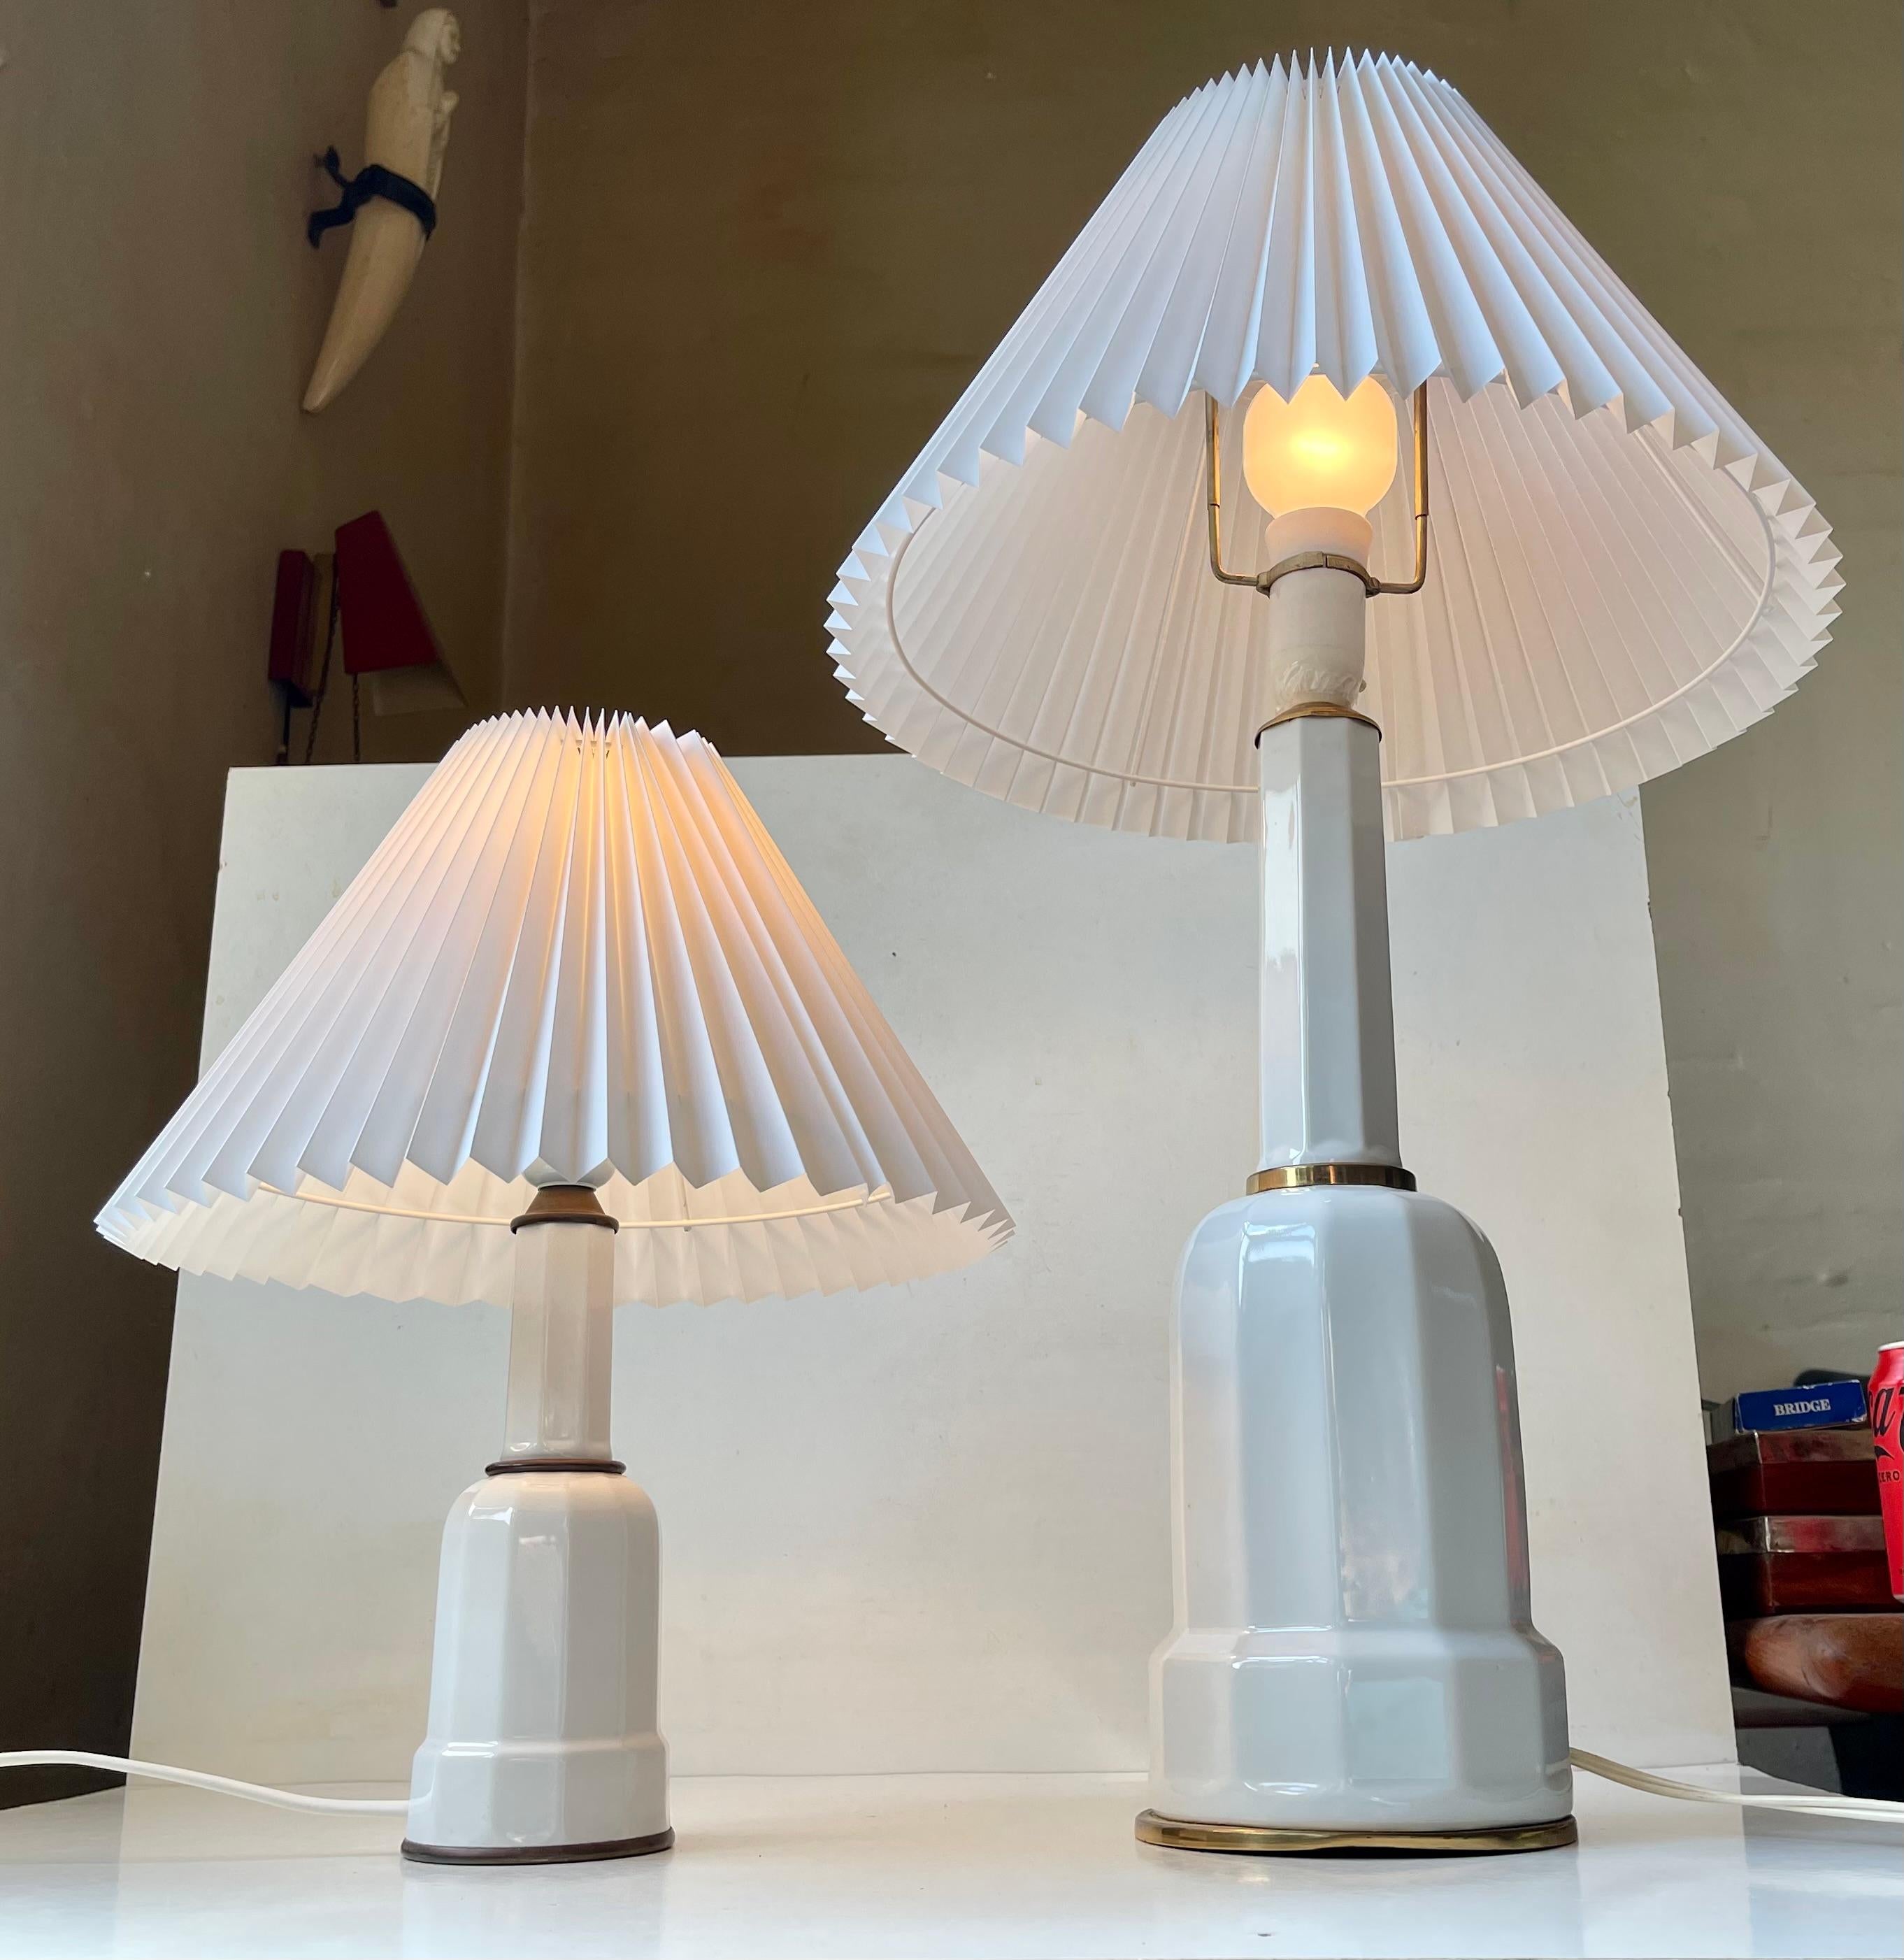 A matching 'small' and large example of the original Heiberg table lamps. They are made from white glazed porcelain featuring accents in patinated brass. The name Heiberg derives from a 1830s painting by Wilhelm Marstrand of the Heiberg family